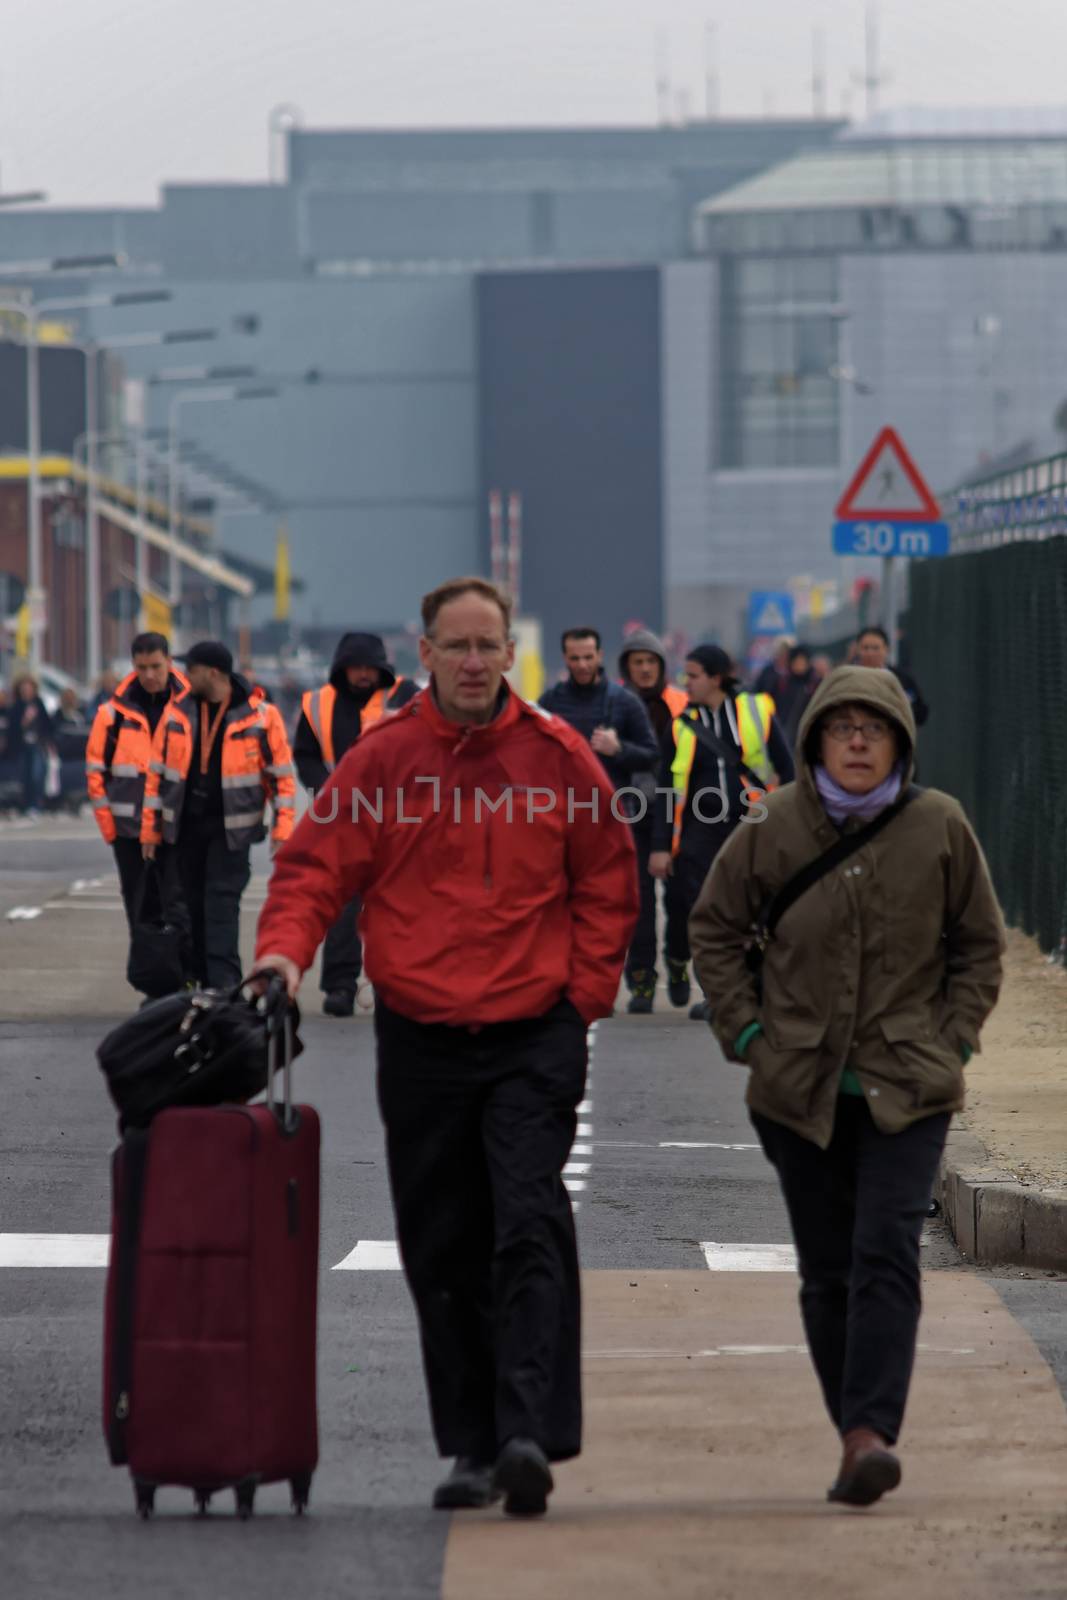 BELGIUM, Brussels: Passengers leave Brussels airport, on March 22, 2016 in Zaventem , following its evacuation after at least 13 people were killed and 35 injured as twin blasts rocked the main terminal of Brussels airport.